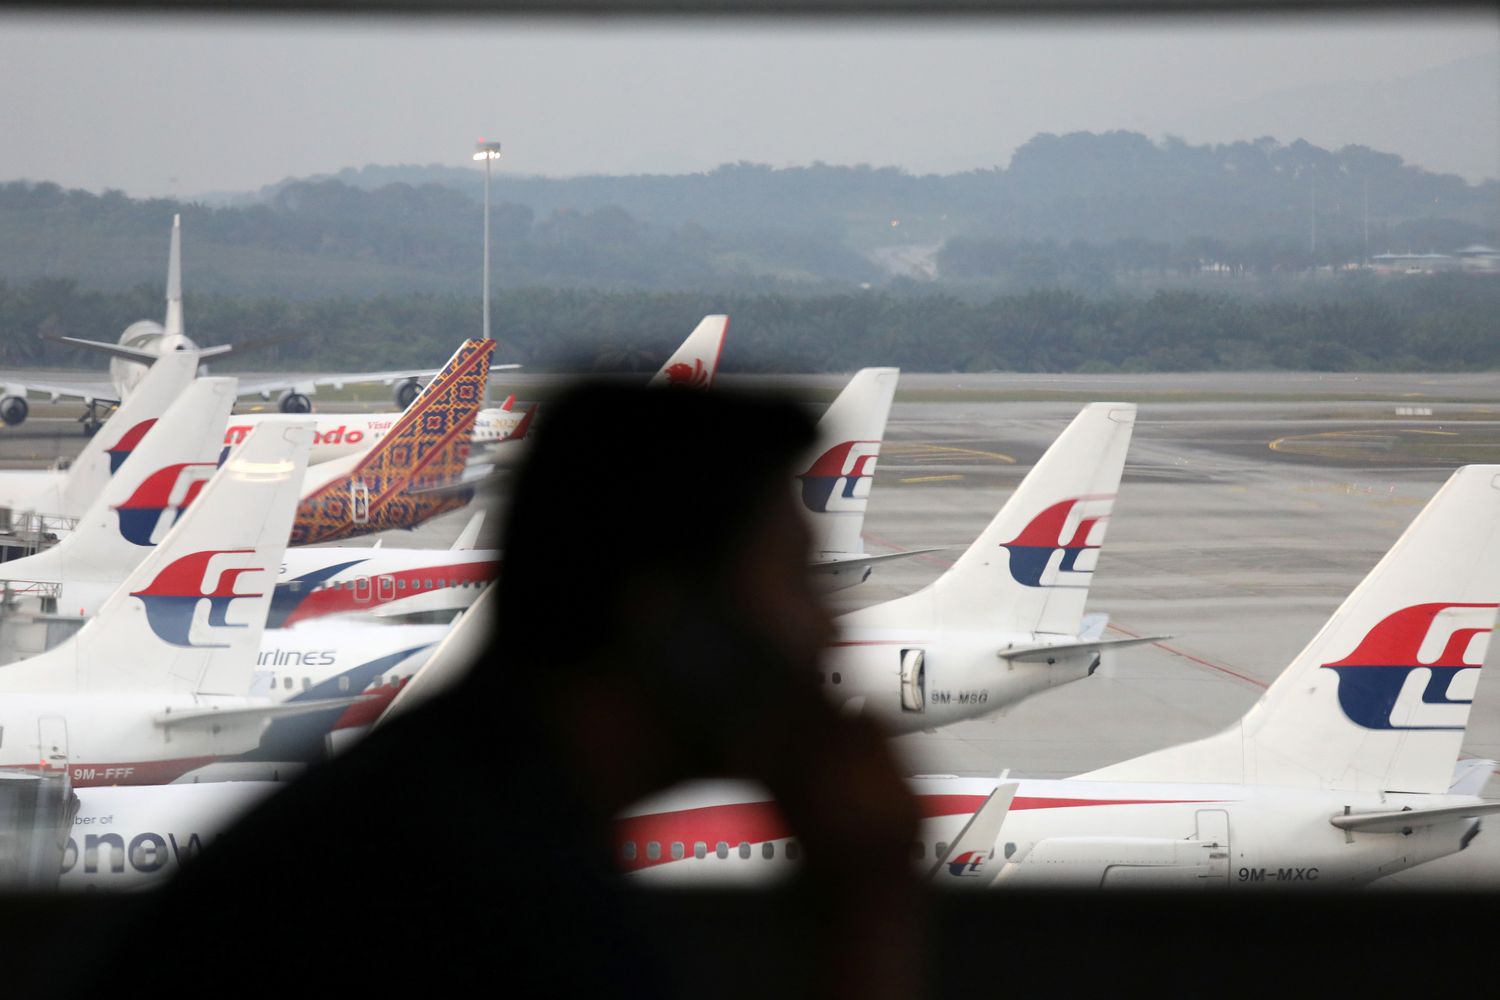 Malaysia's air safety rating said to be downgraded